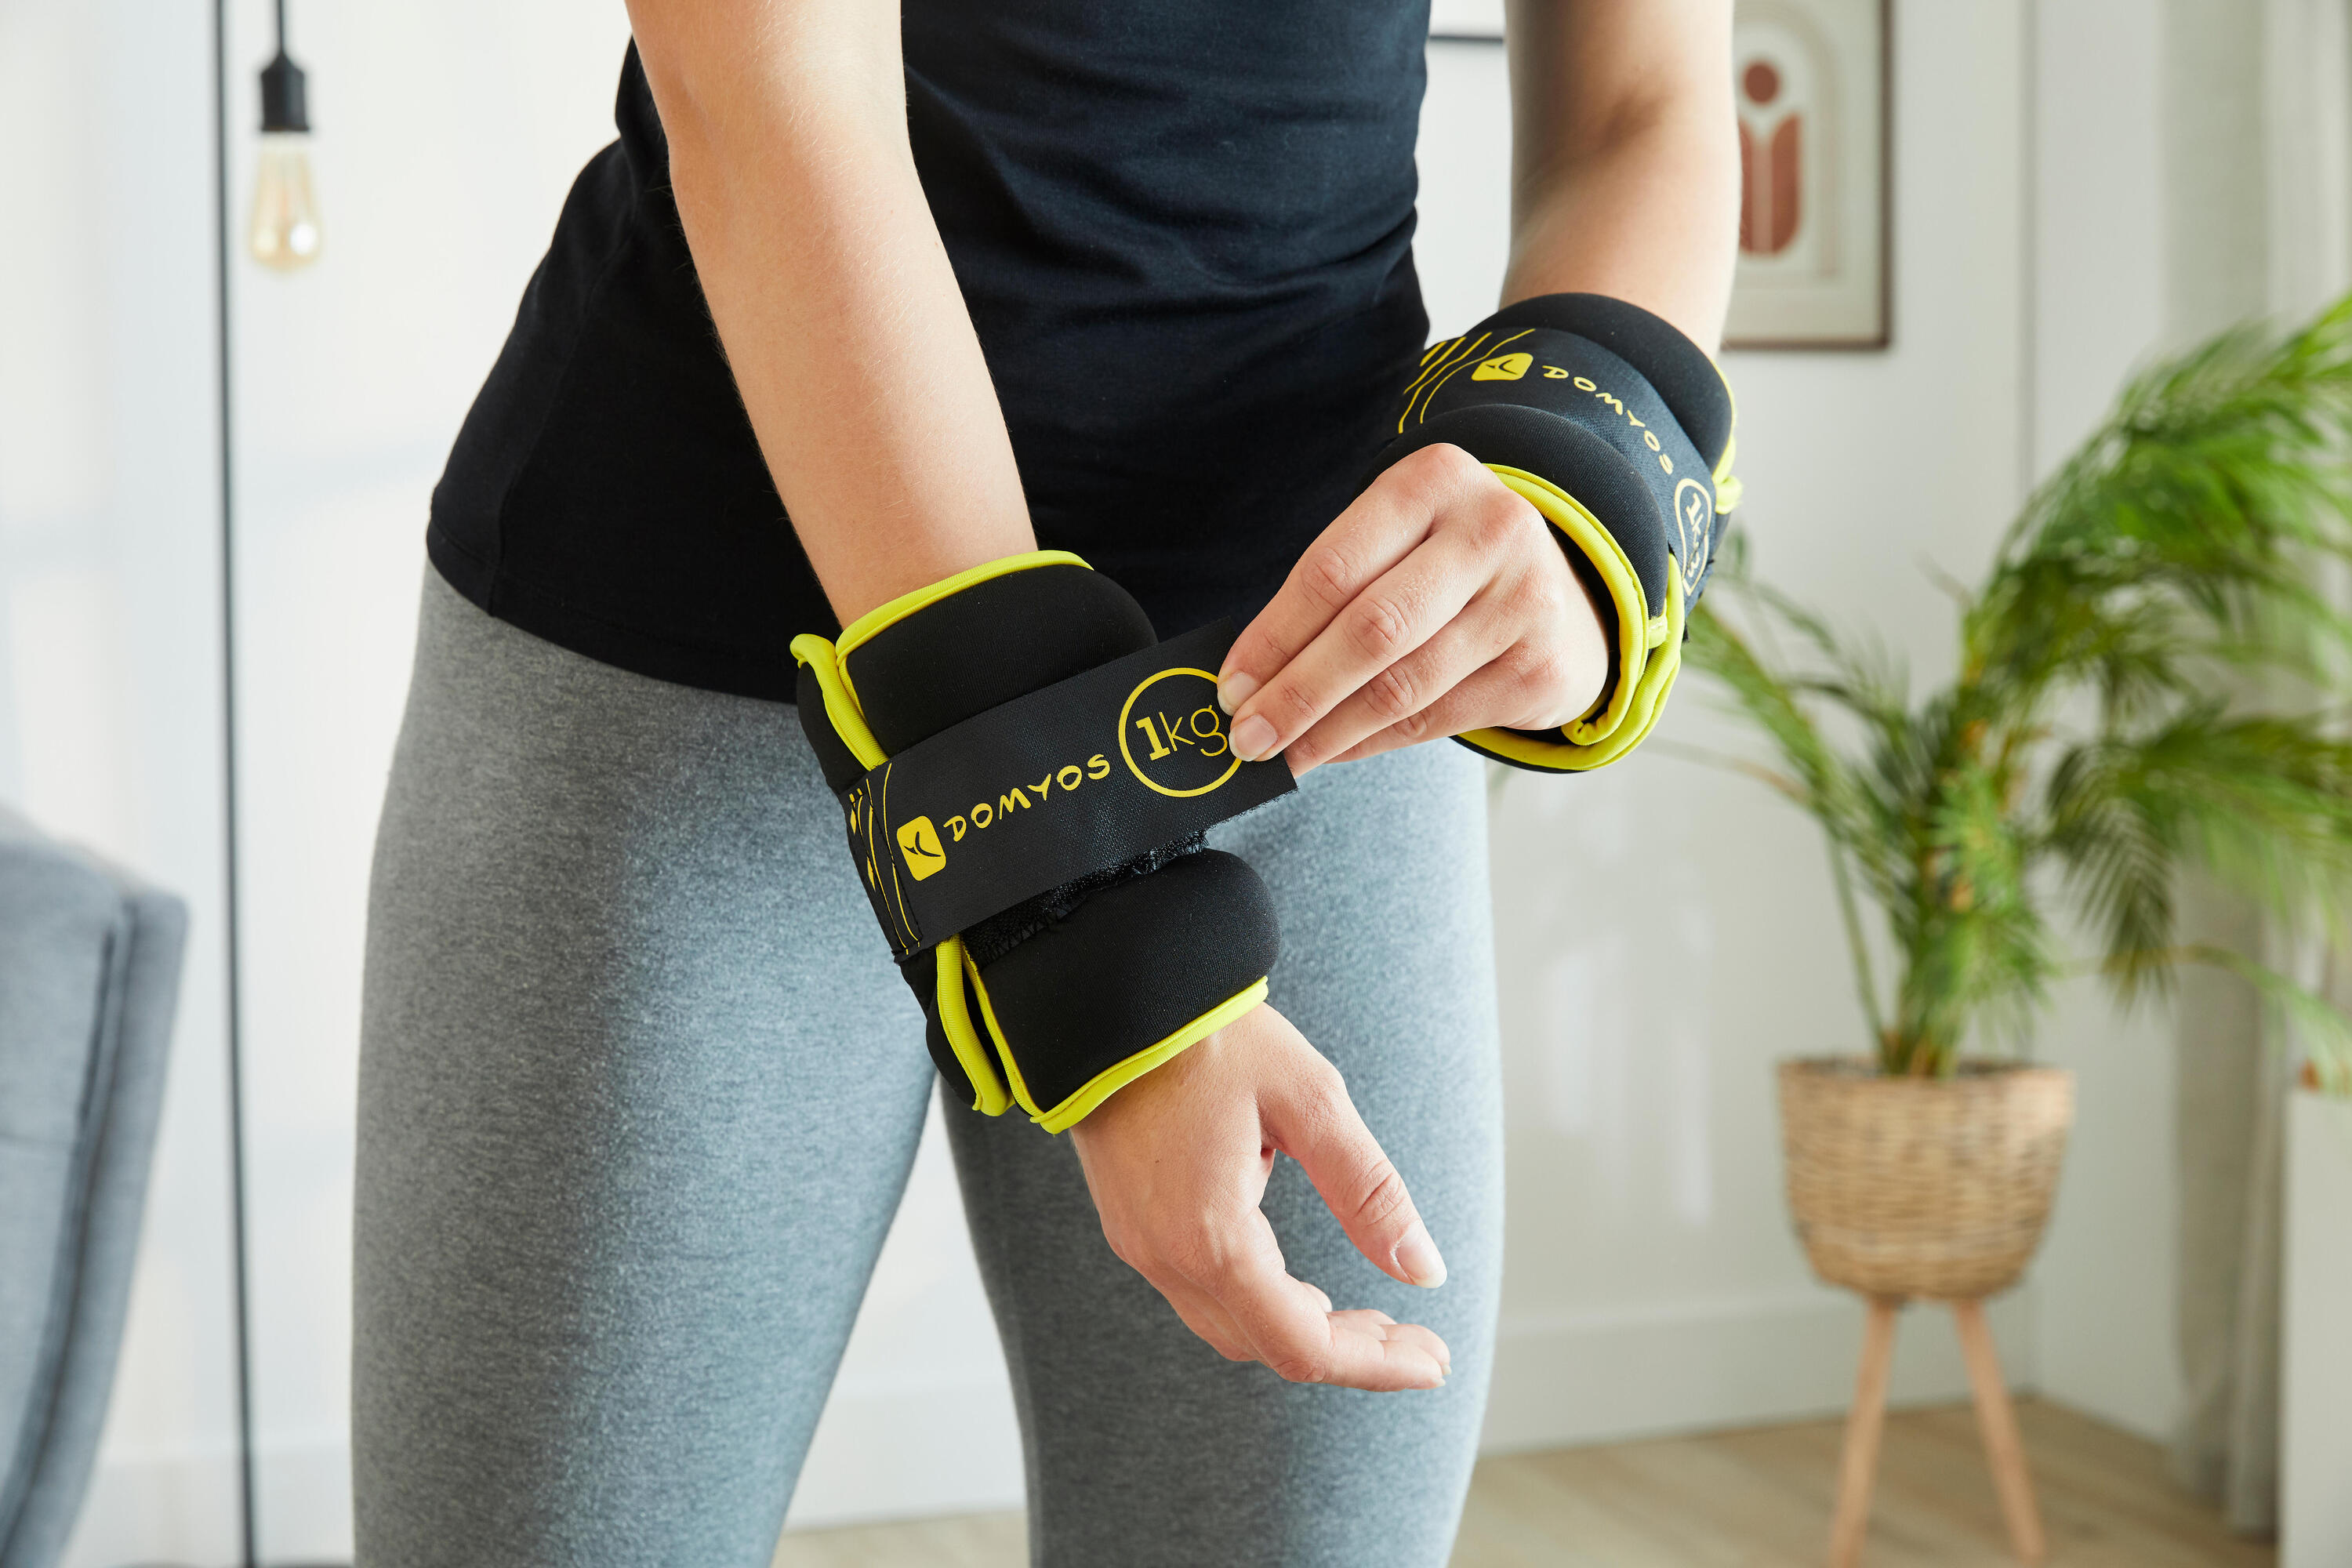 Ankle/Wrist Weights 1 kg x 2 - Yellow 4/5